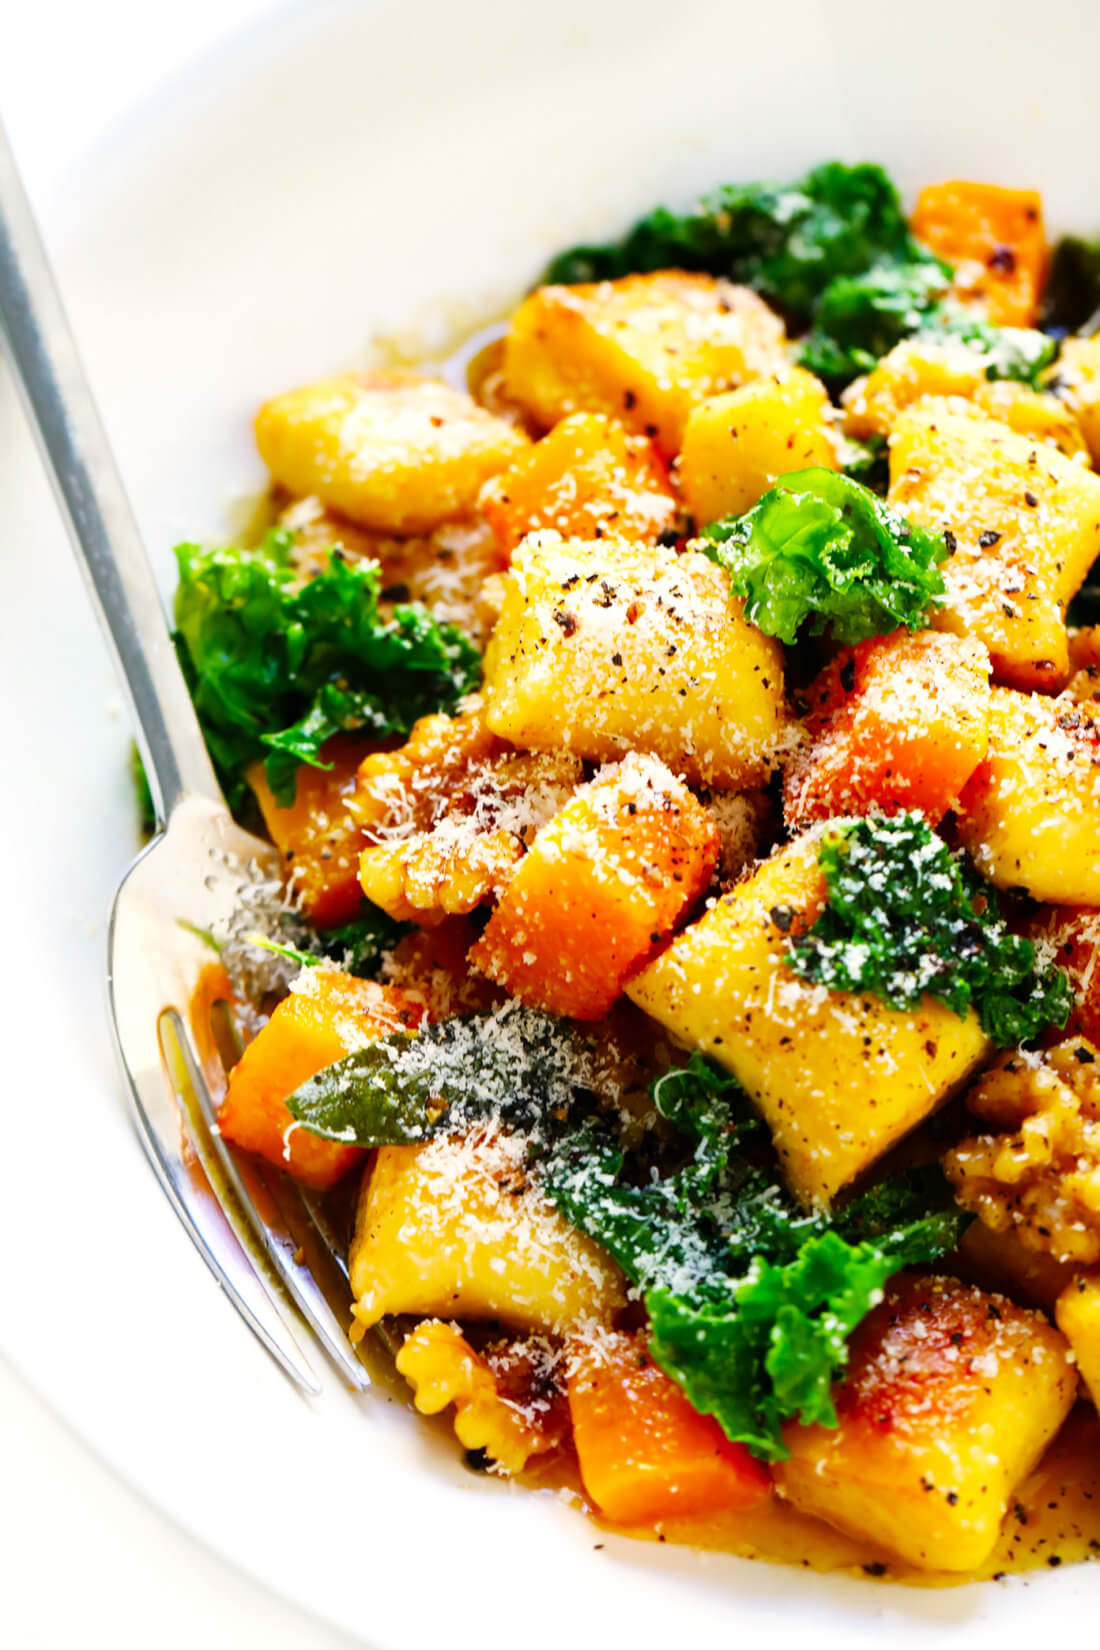 Toasted Gnocchi with Roasted Butternut Squash, Kale, Walnuts, Parmesan and Brown Butter Sauce